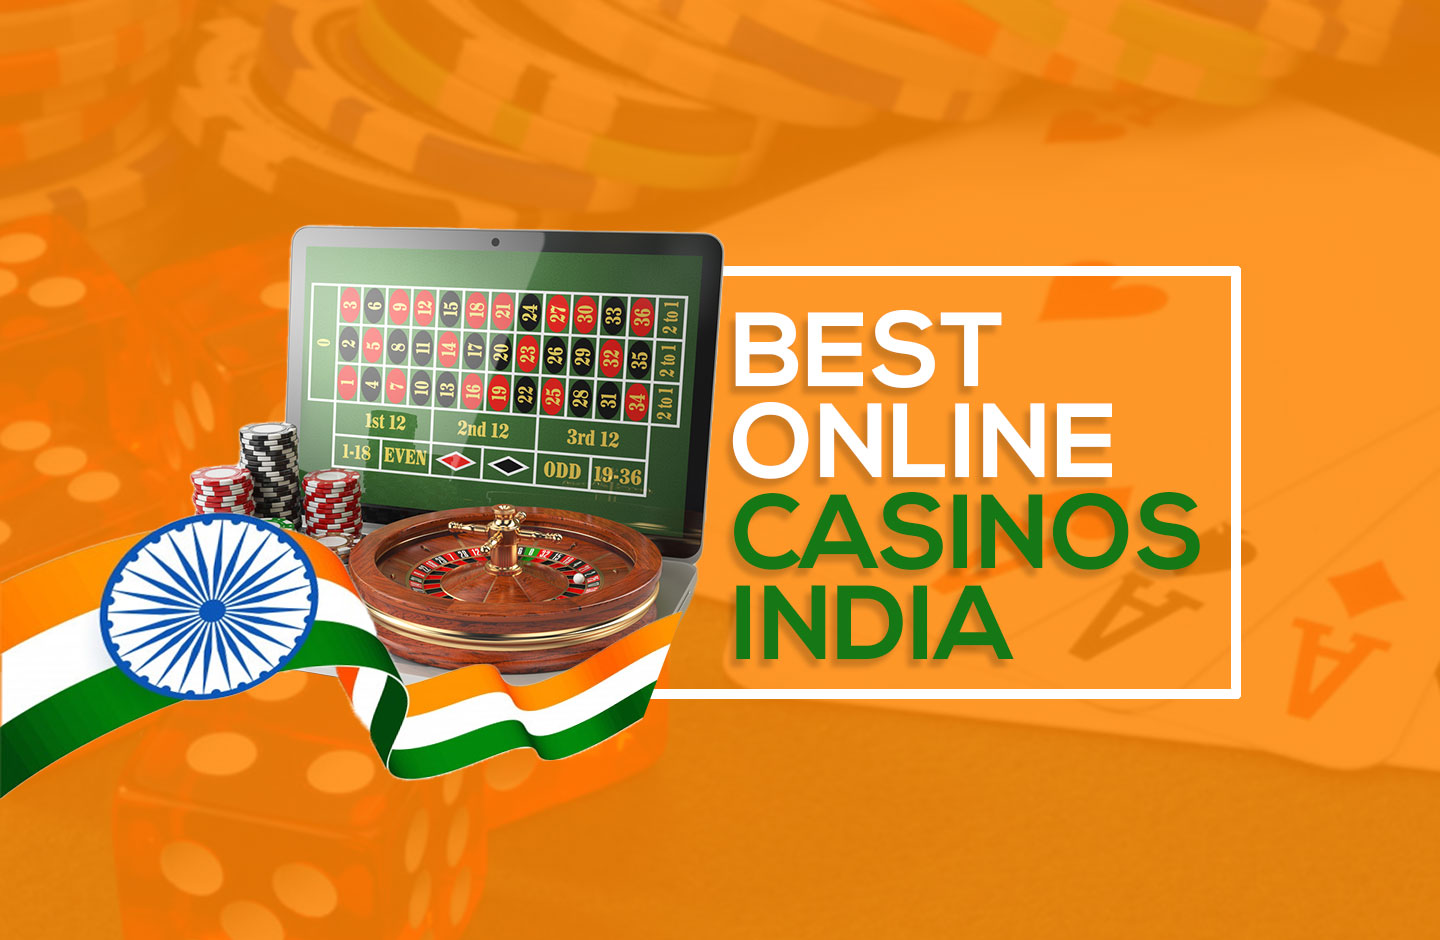 Get Better Best Online Casinos Results By Following 3 Simple Steps